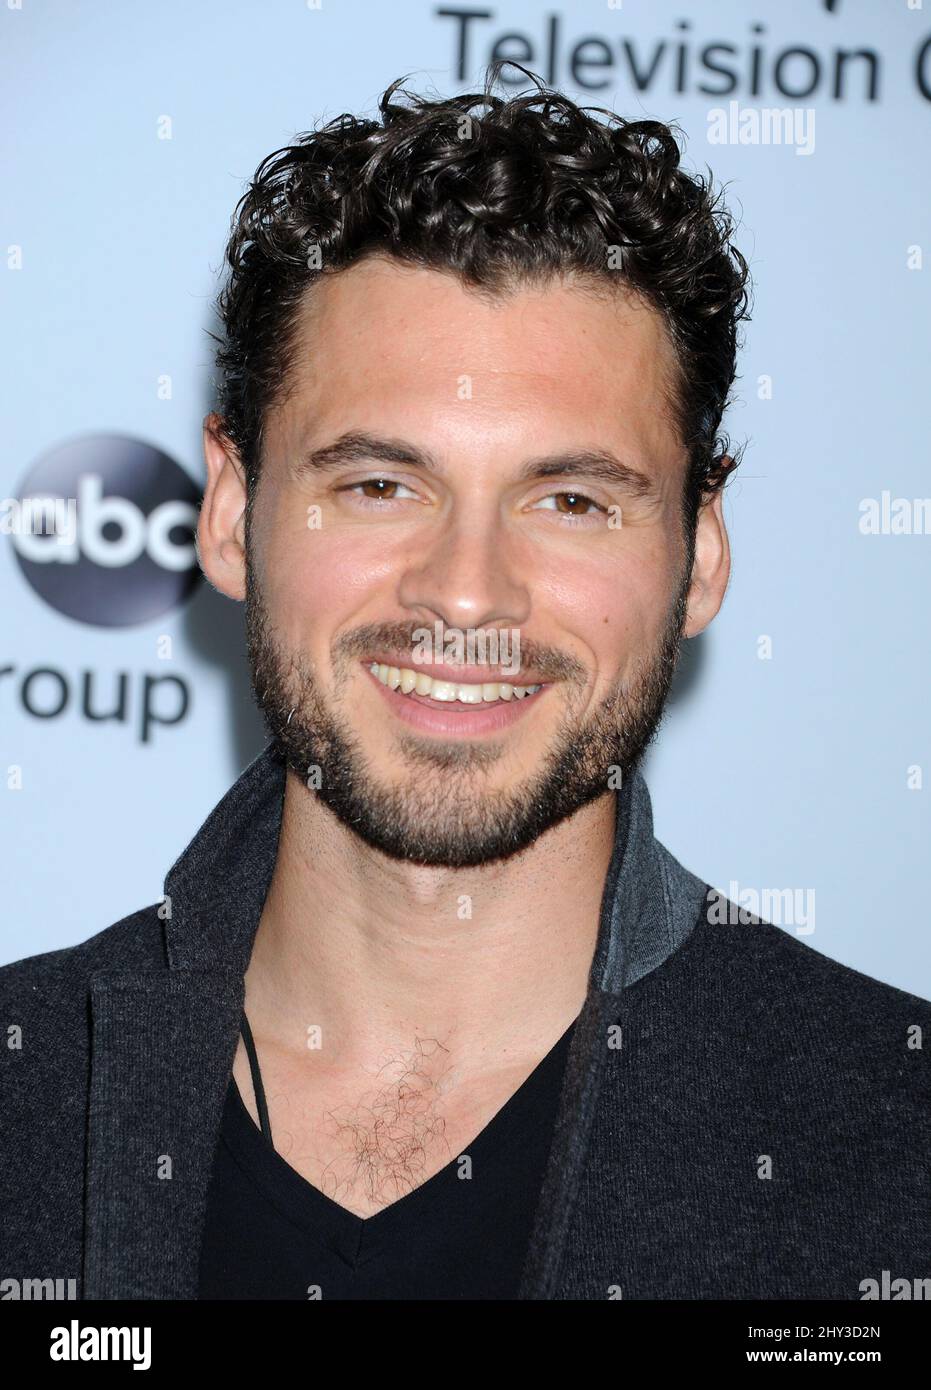 Adan Canto attending the ABC Television Group Winter TCA Press Tour held at the Langham Huntington Hotel Stock Photo